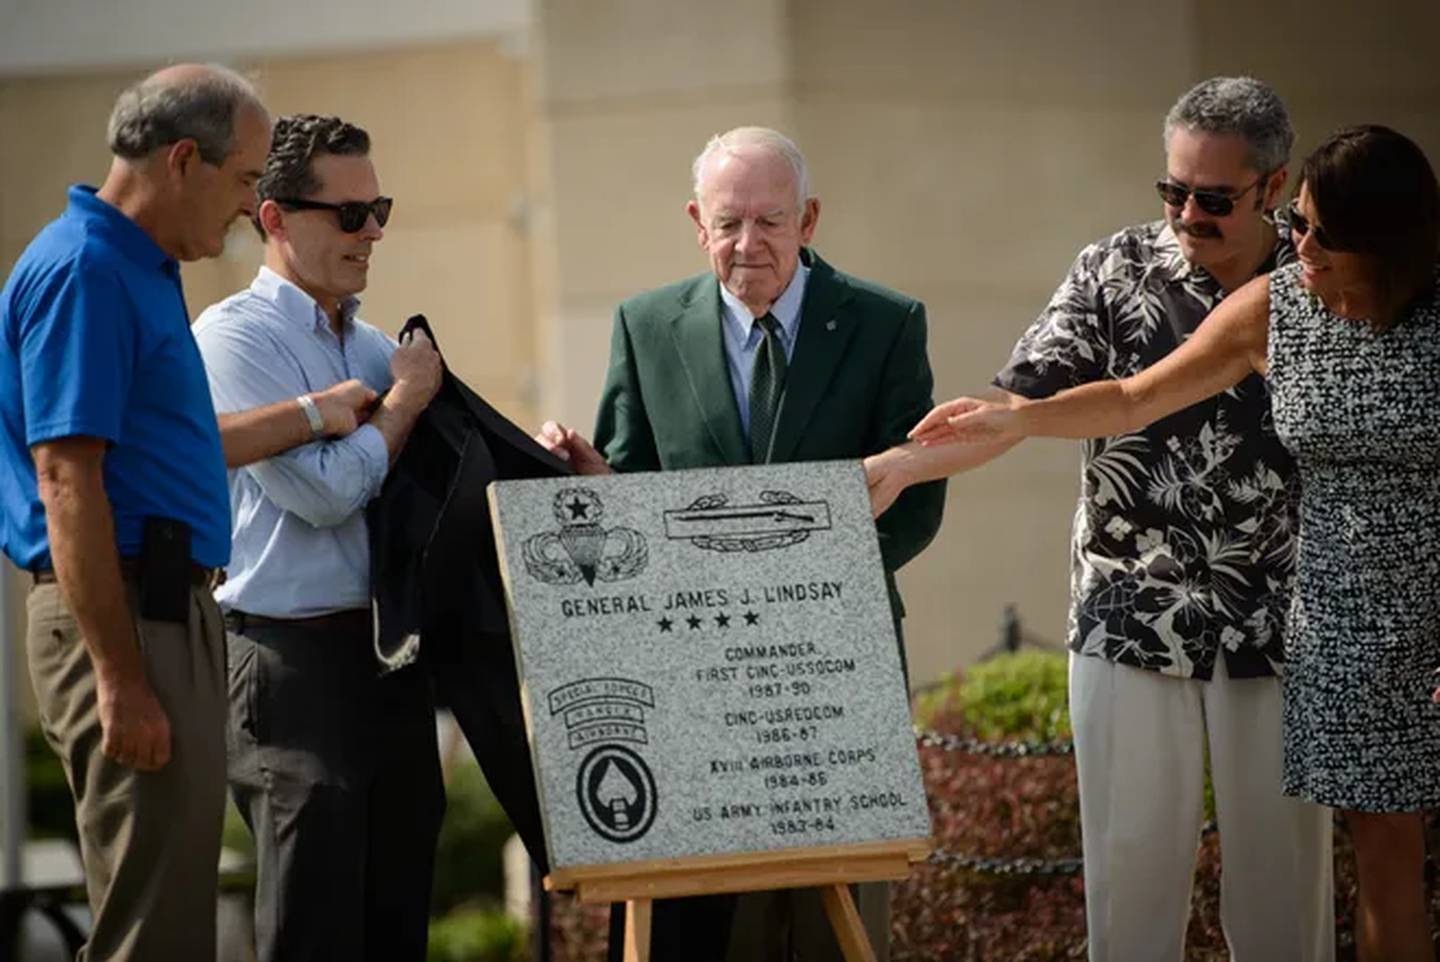 Retired Gen. James Lindsay, center, and family and friends unveil a paver in Lindsay’s honor during the National Airborne Day celebration ceremony Saturday, Aug. 15, 2015, at the Airborne & Special Operations Museum.